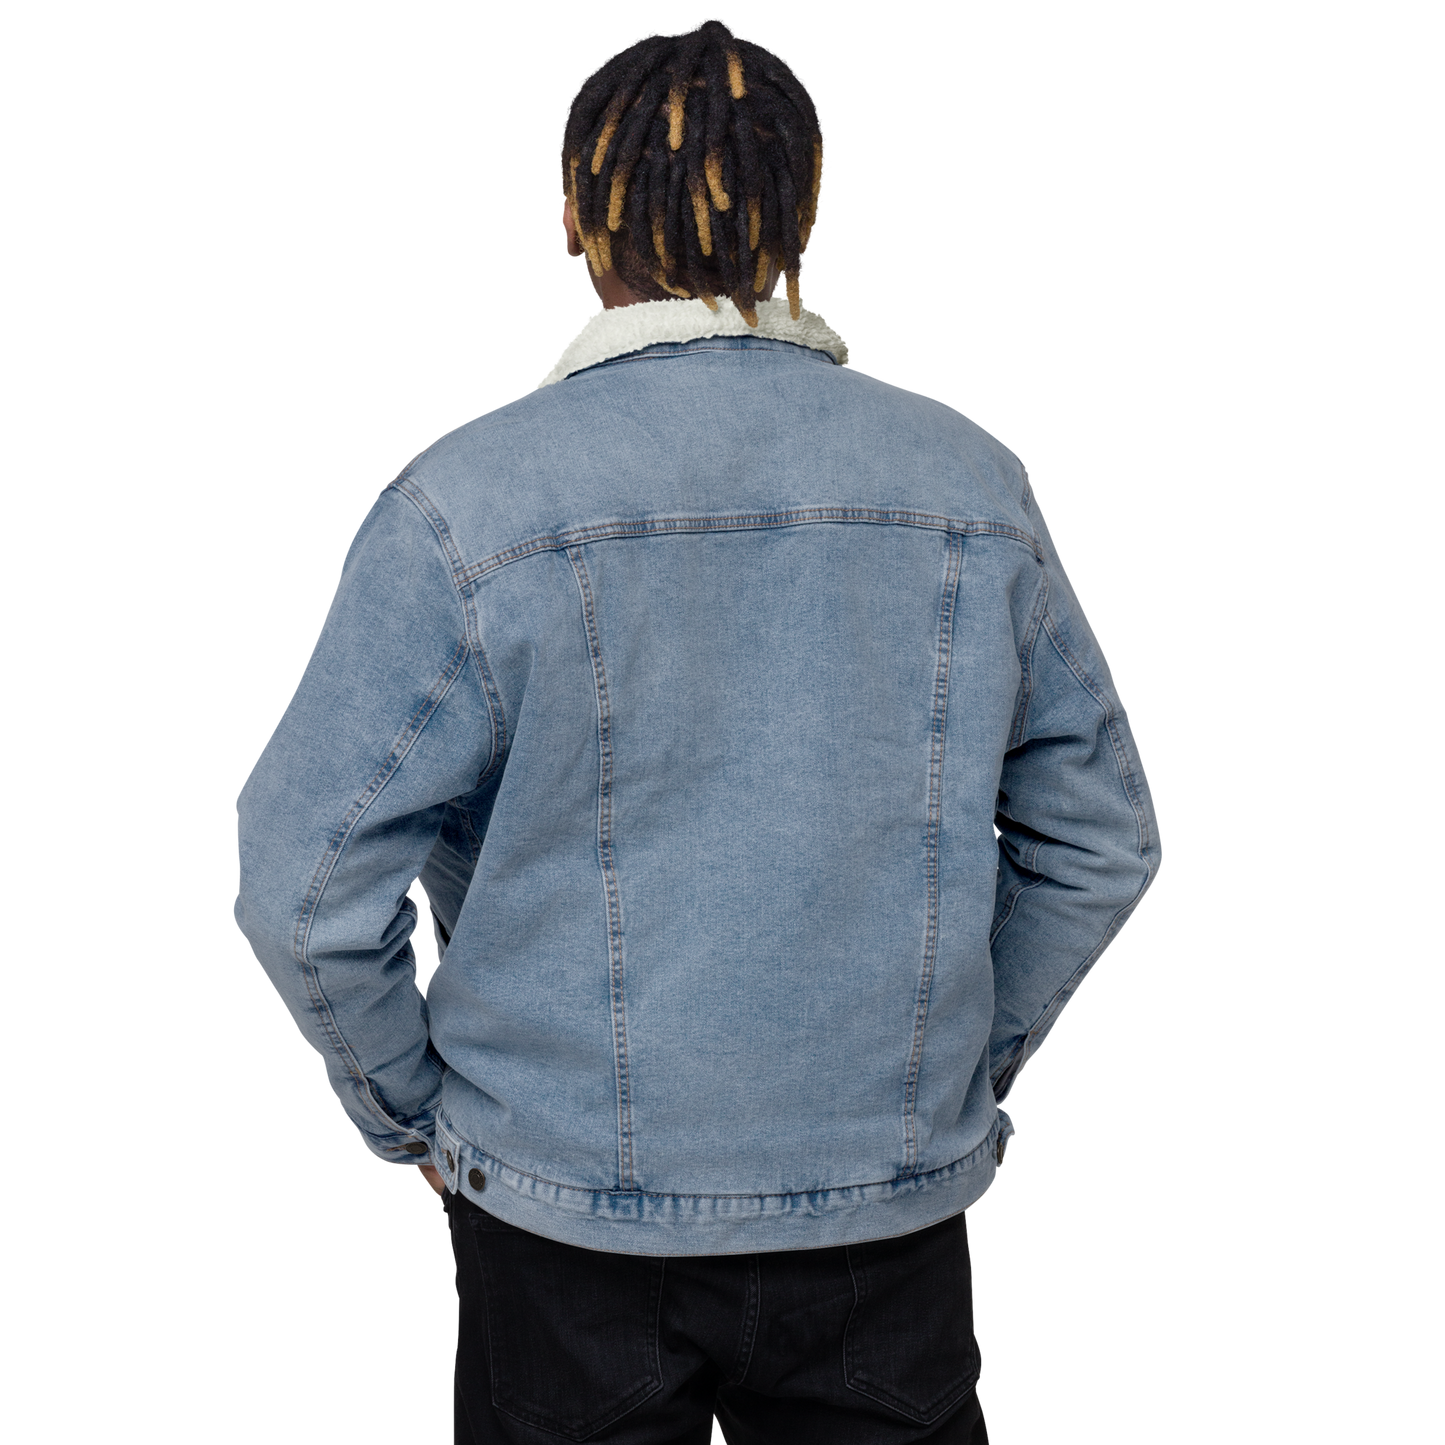 YHM Designs - YUL Montreal Denim Sherpa Jacket - Crossed-X Design with Airport Code and Vintage Propliner - Black & White Embroidery - Image 12